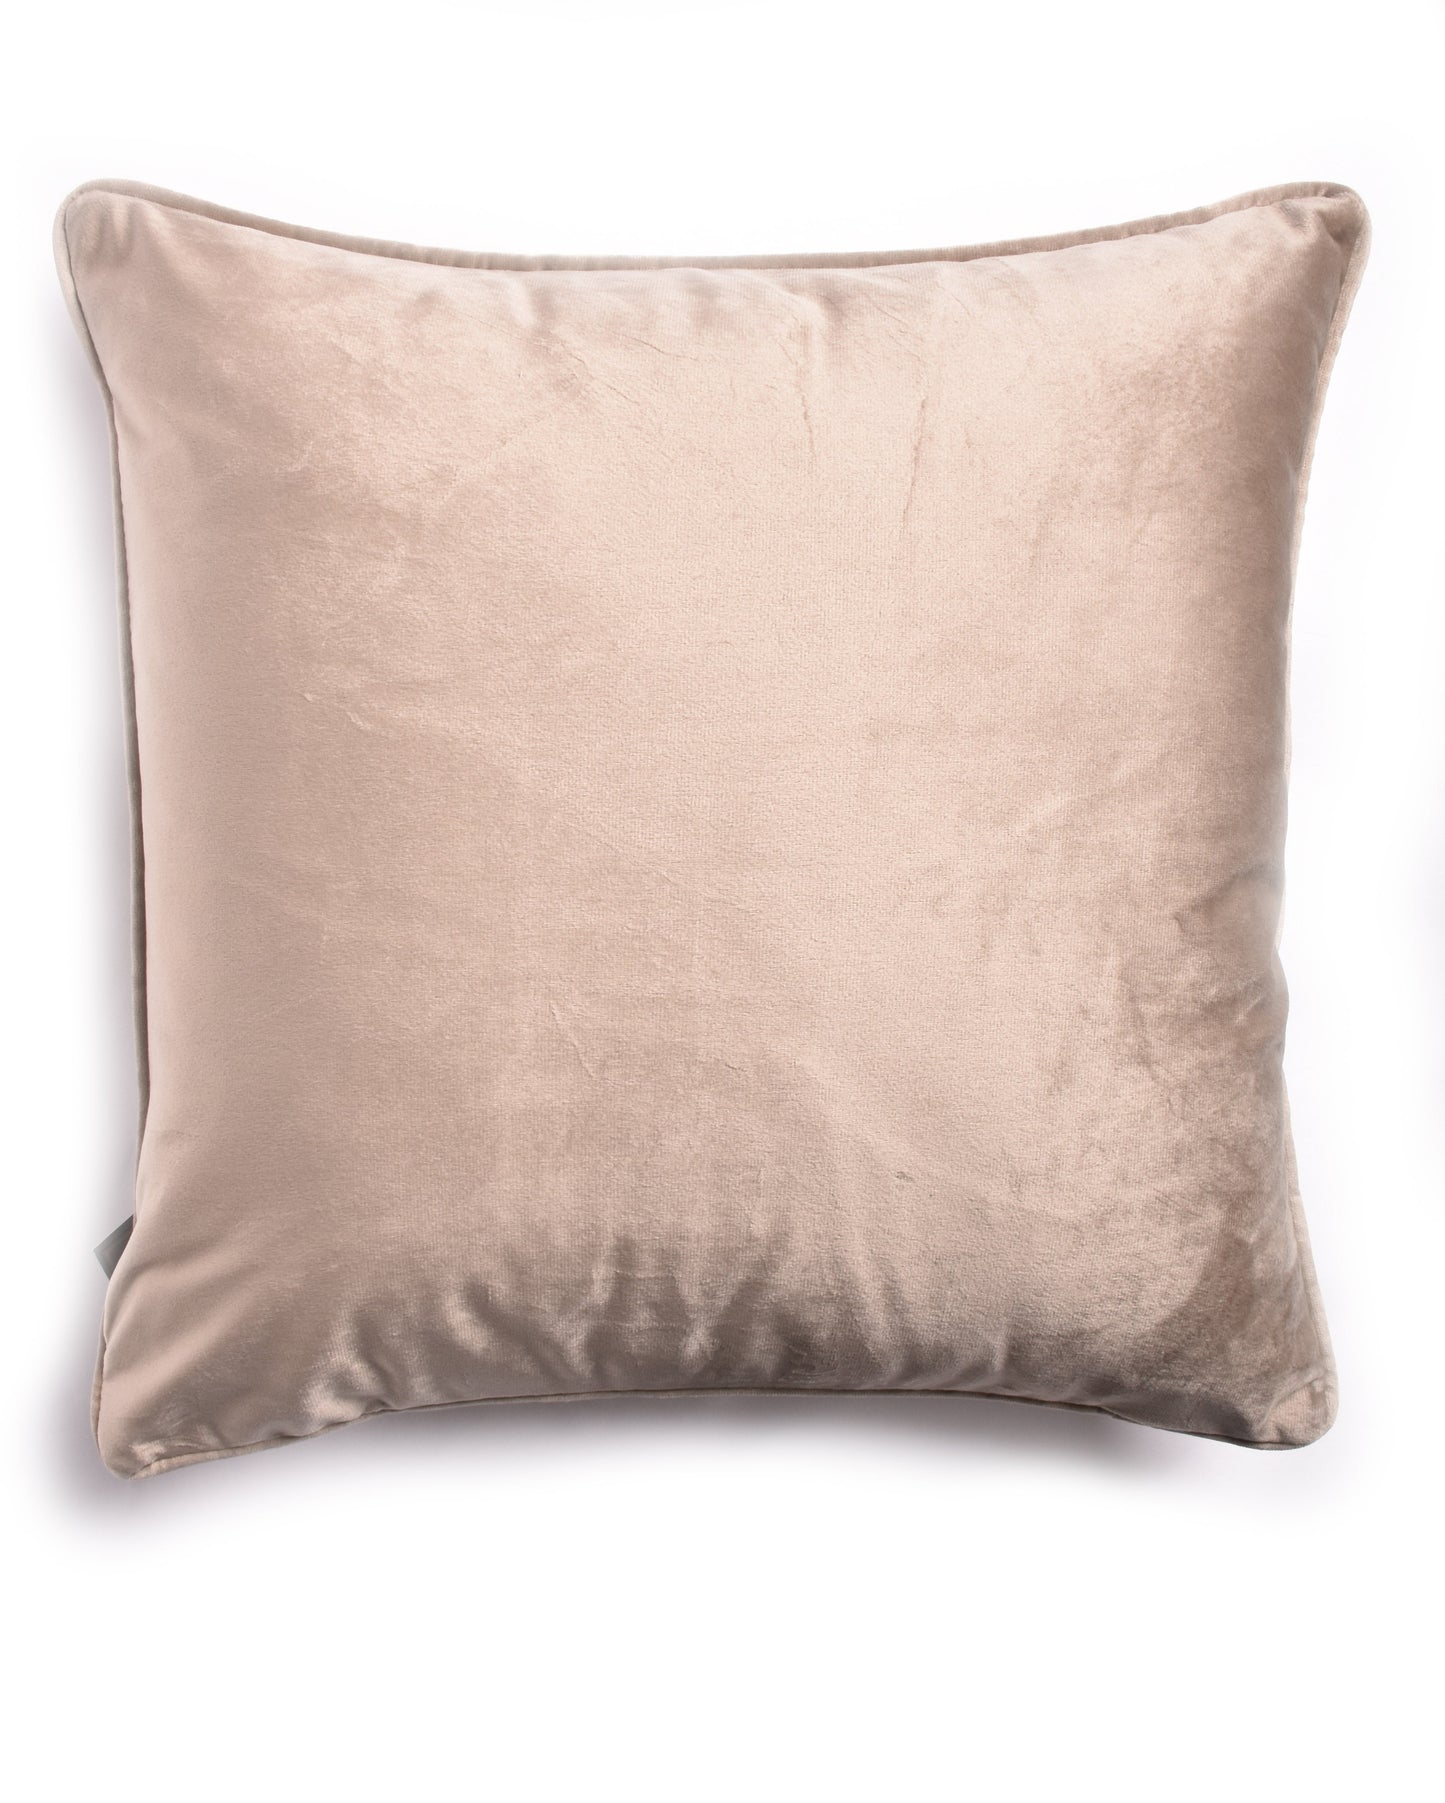 French Velvet Piped Cushion Cover - Mink